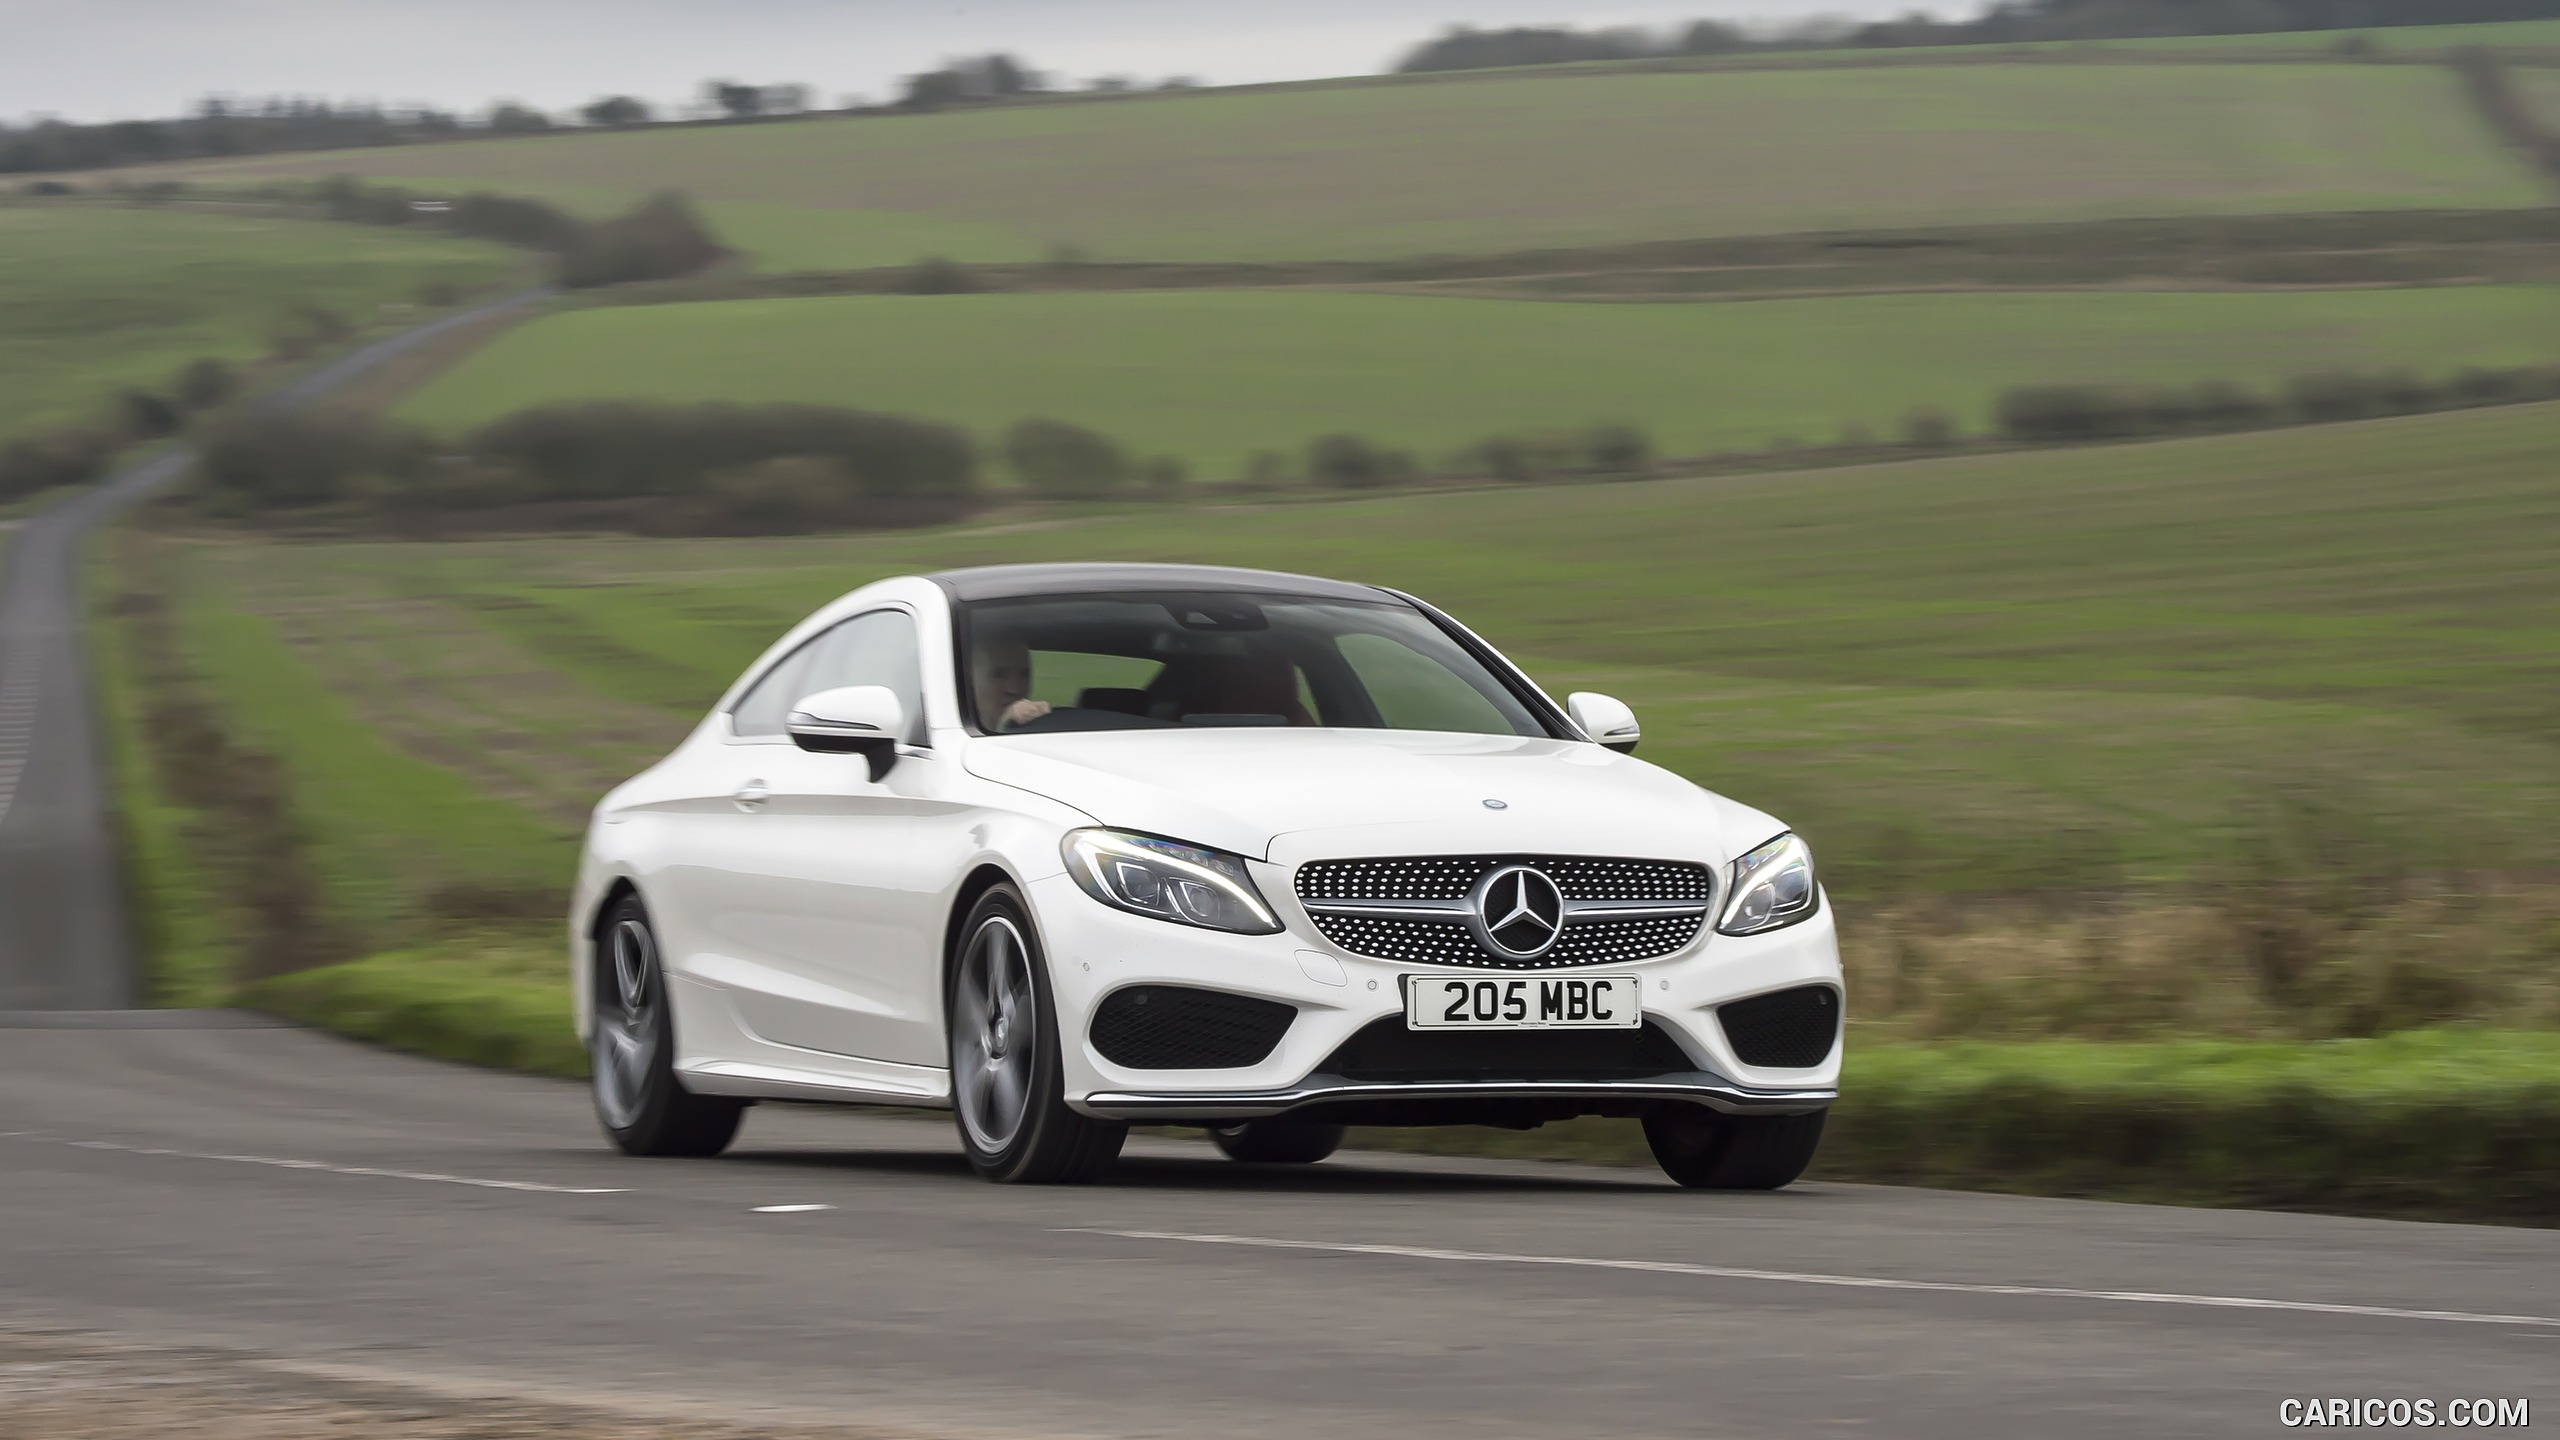 2017 Mercedes-Benz C-Class Coupe (UK-Spec) - Front, #138 of 210